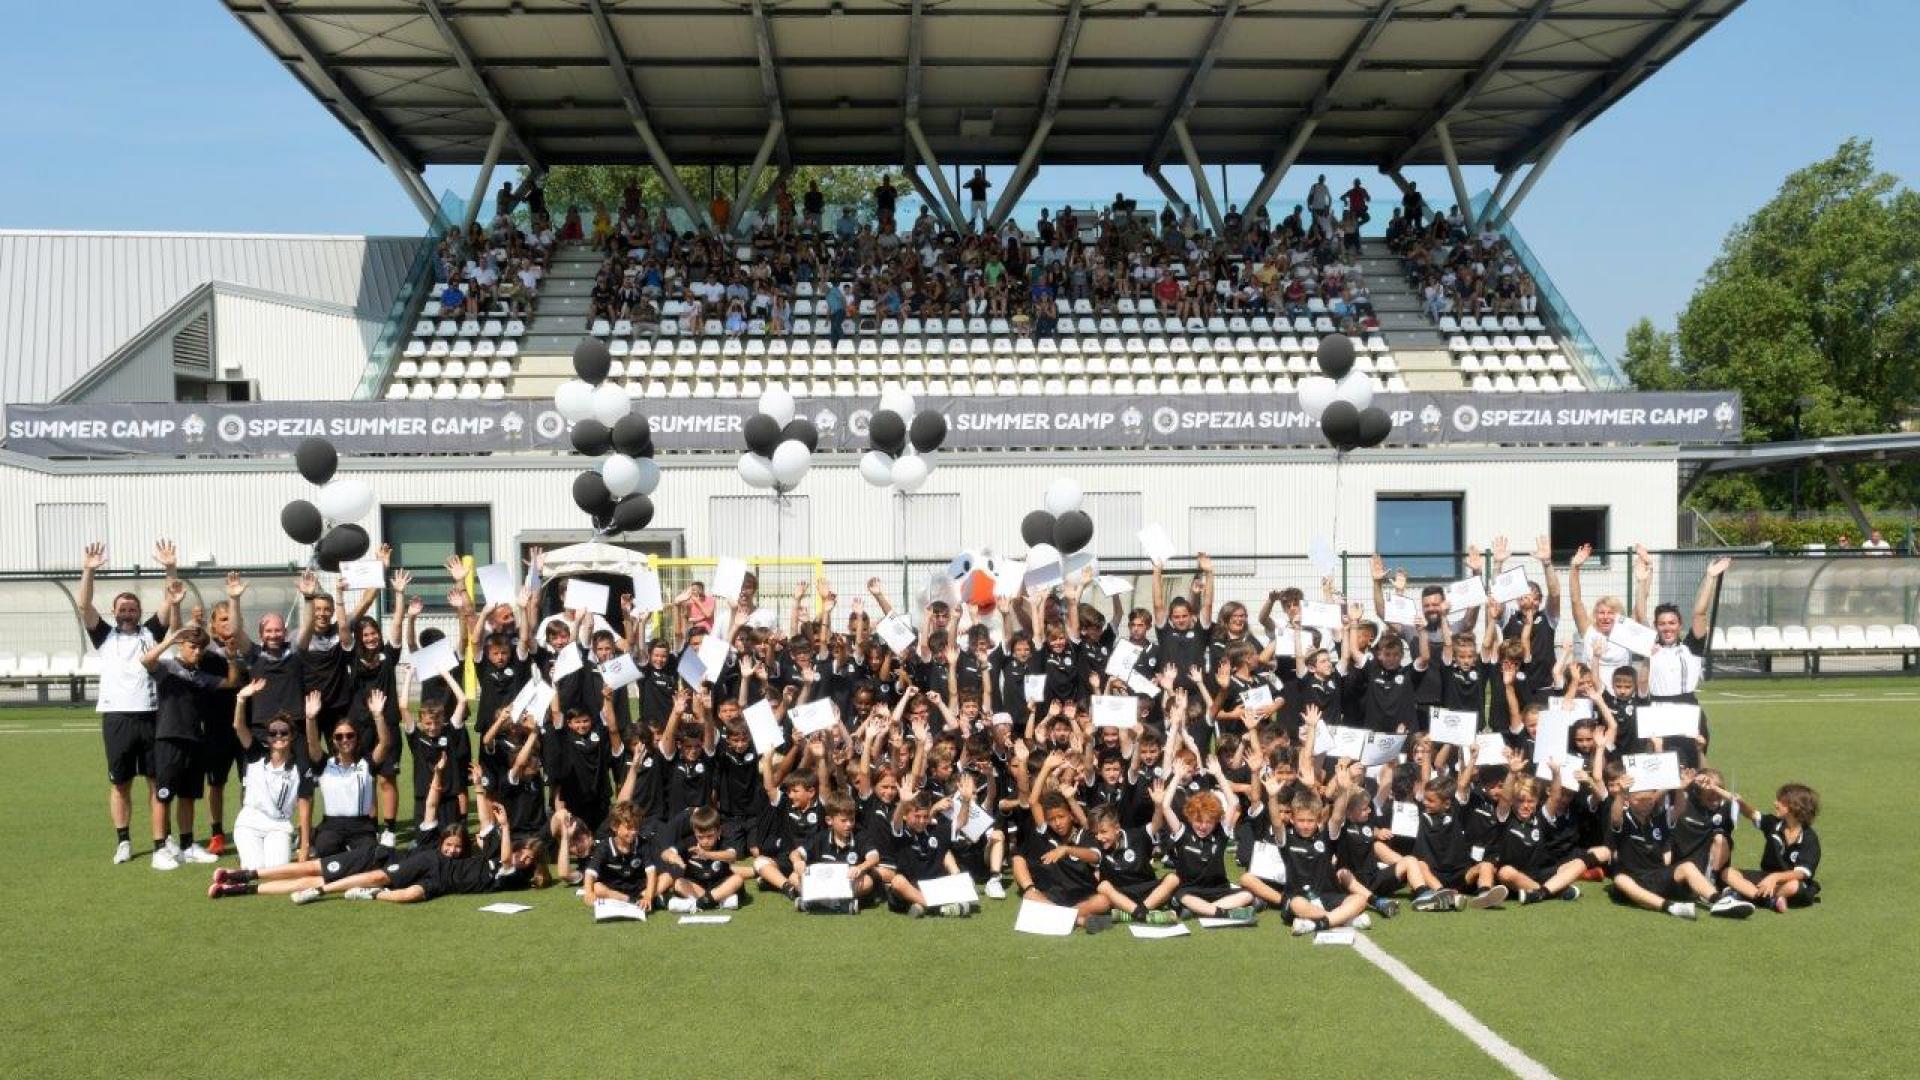 Big celebration for the last day of Spezia Summer Camp 2022